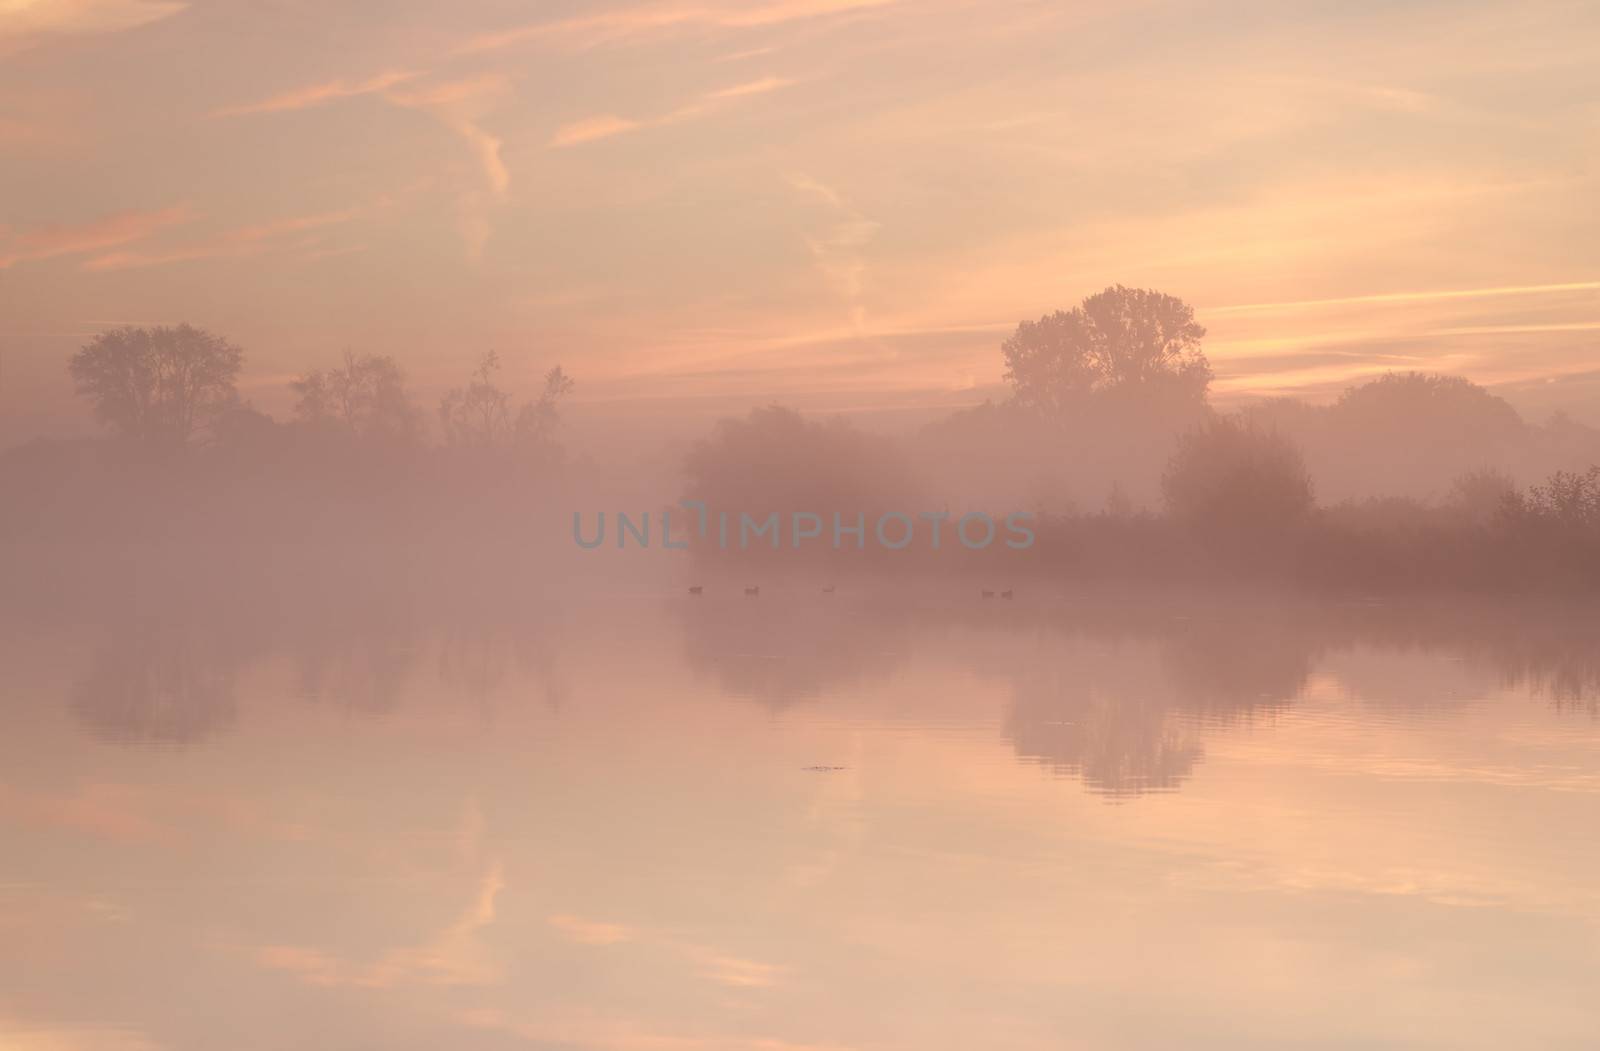 tree silhouettes by lake during misty sunrise, Drenthe, Netherlands